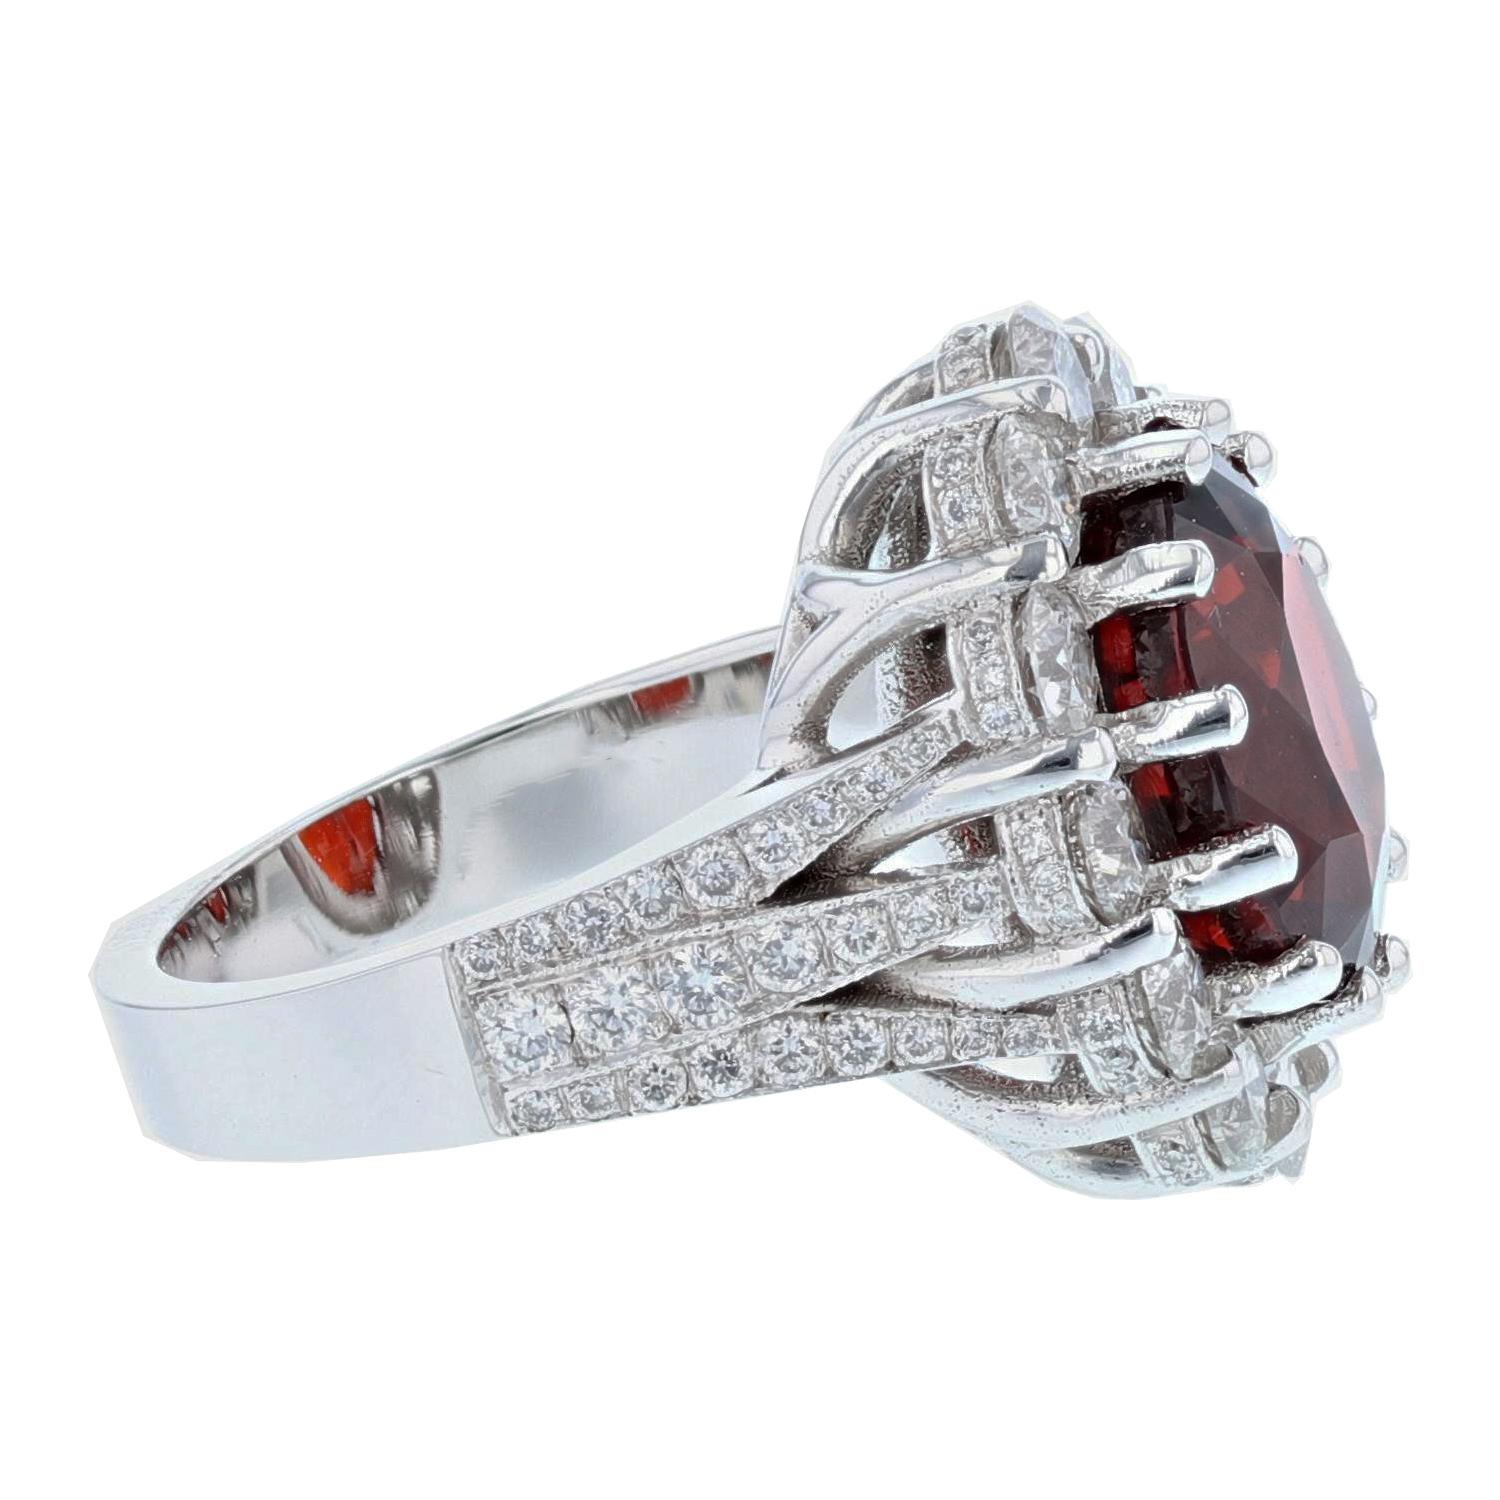 This ring is made in 14 karat white gold. The center stone is an Oval Cut Natural Spessartite Garnet weighing 8.93 carats and is prong set. The Garnet is AGL Certified, certificate number AGL-GB-51173. The mounting features 98 round cut diamonds